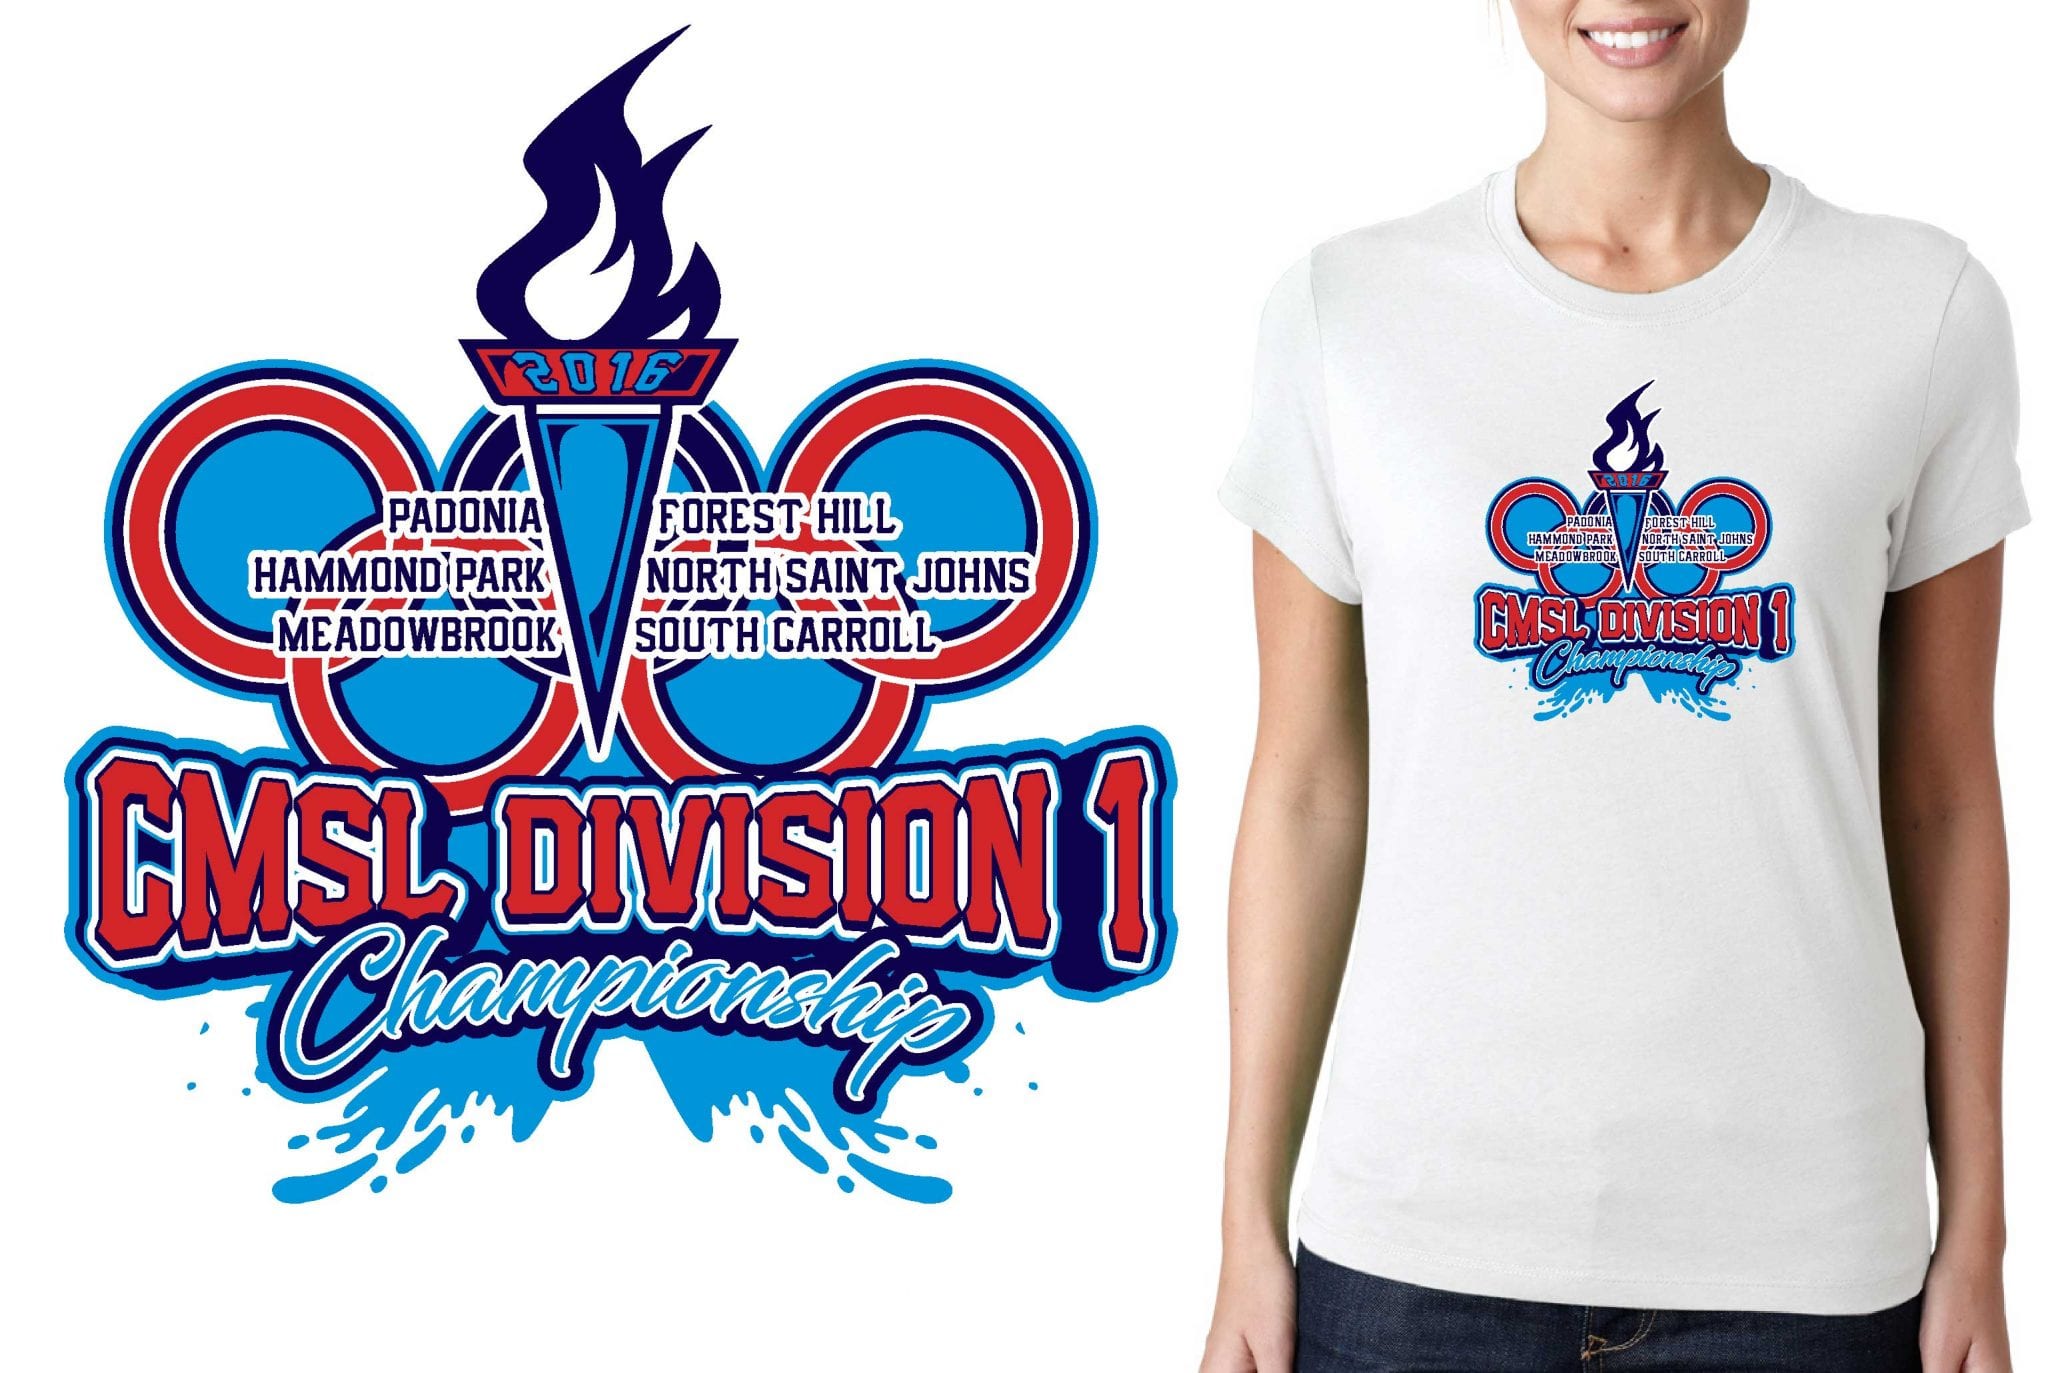 PRINT VECTOR DESIGN FOR 7 30 16 CMSL Division 1 Championship SWIMMING EVENT